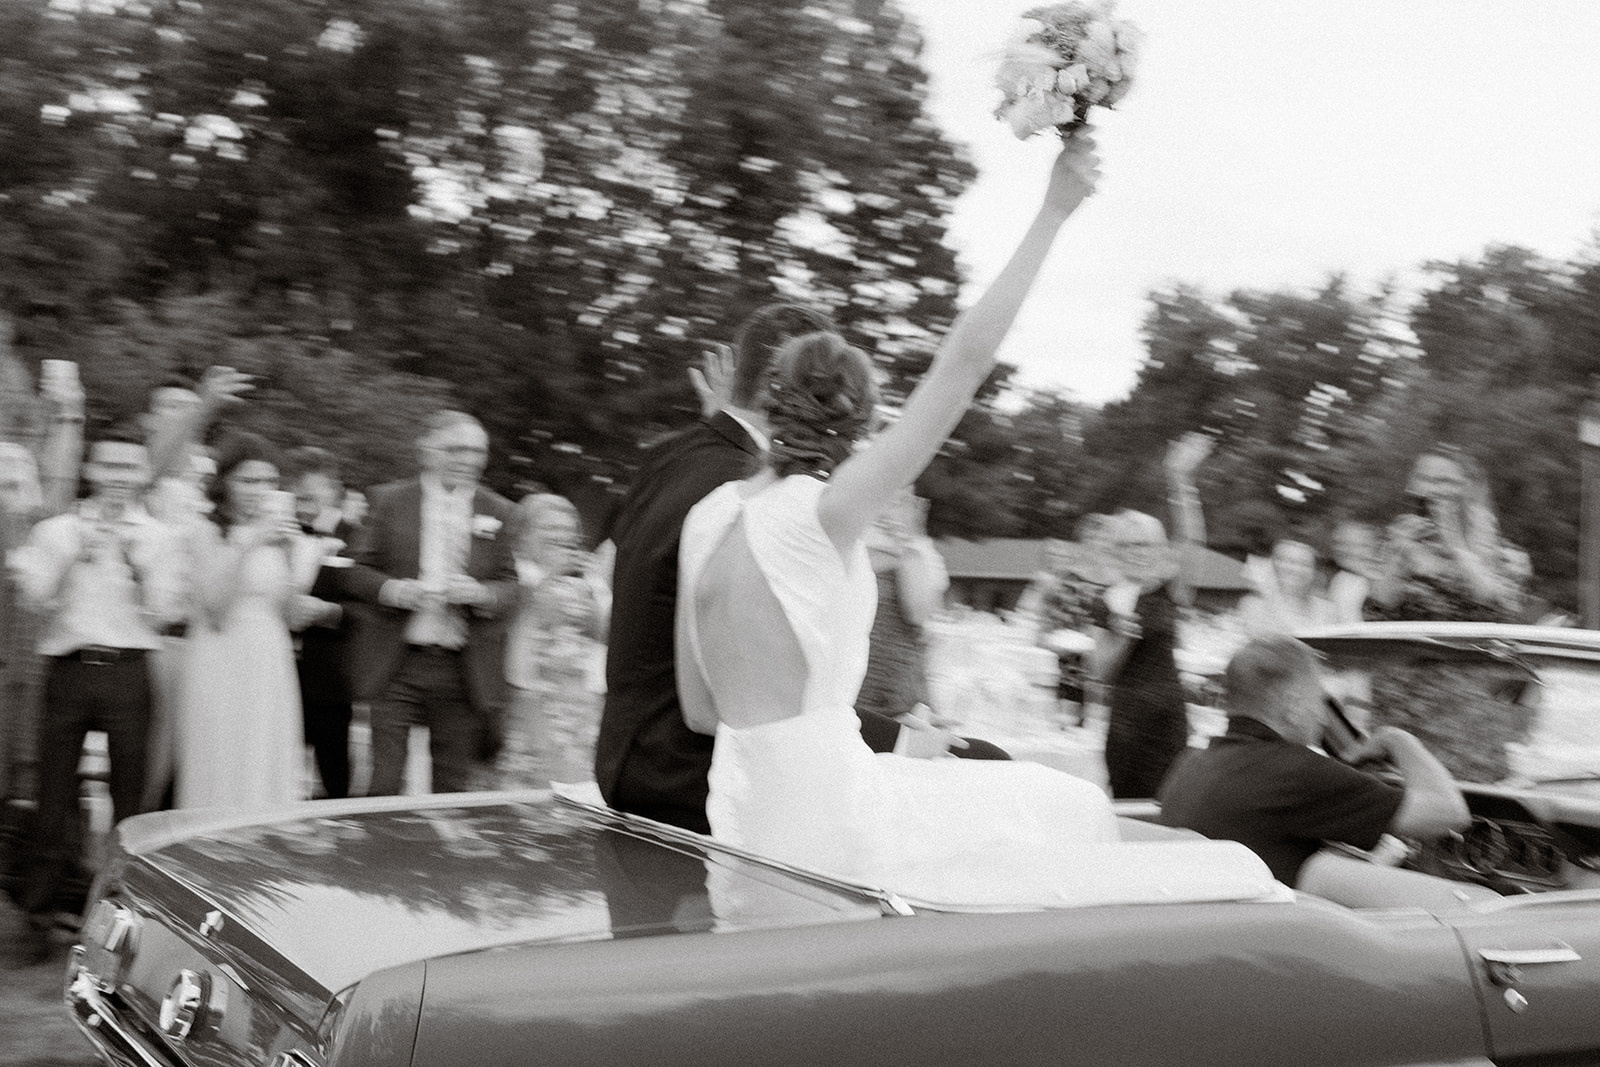 Wedding couple leaving the reception in a classic Ford Mustang.